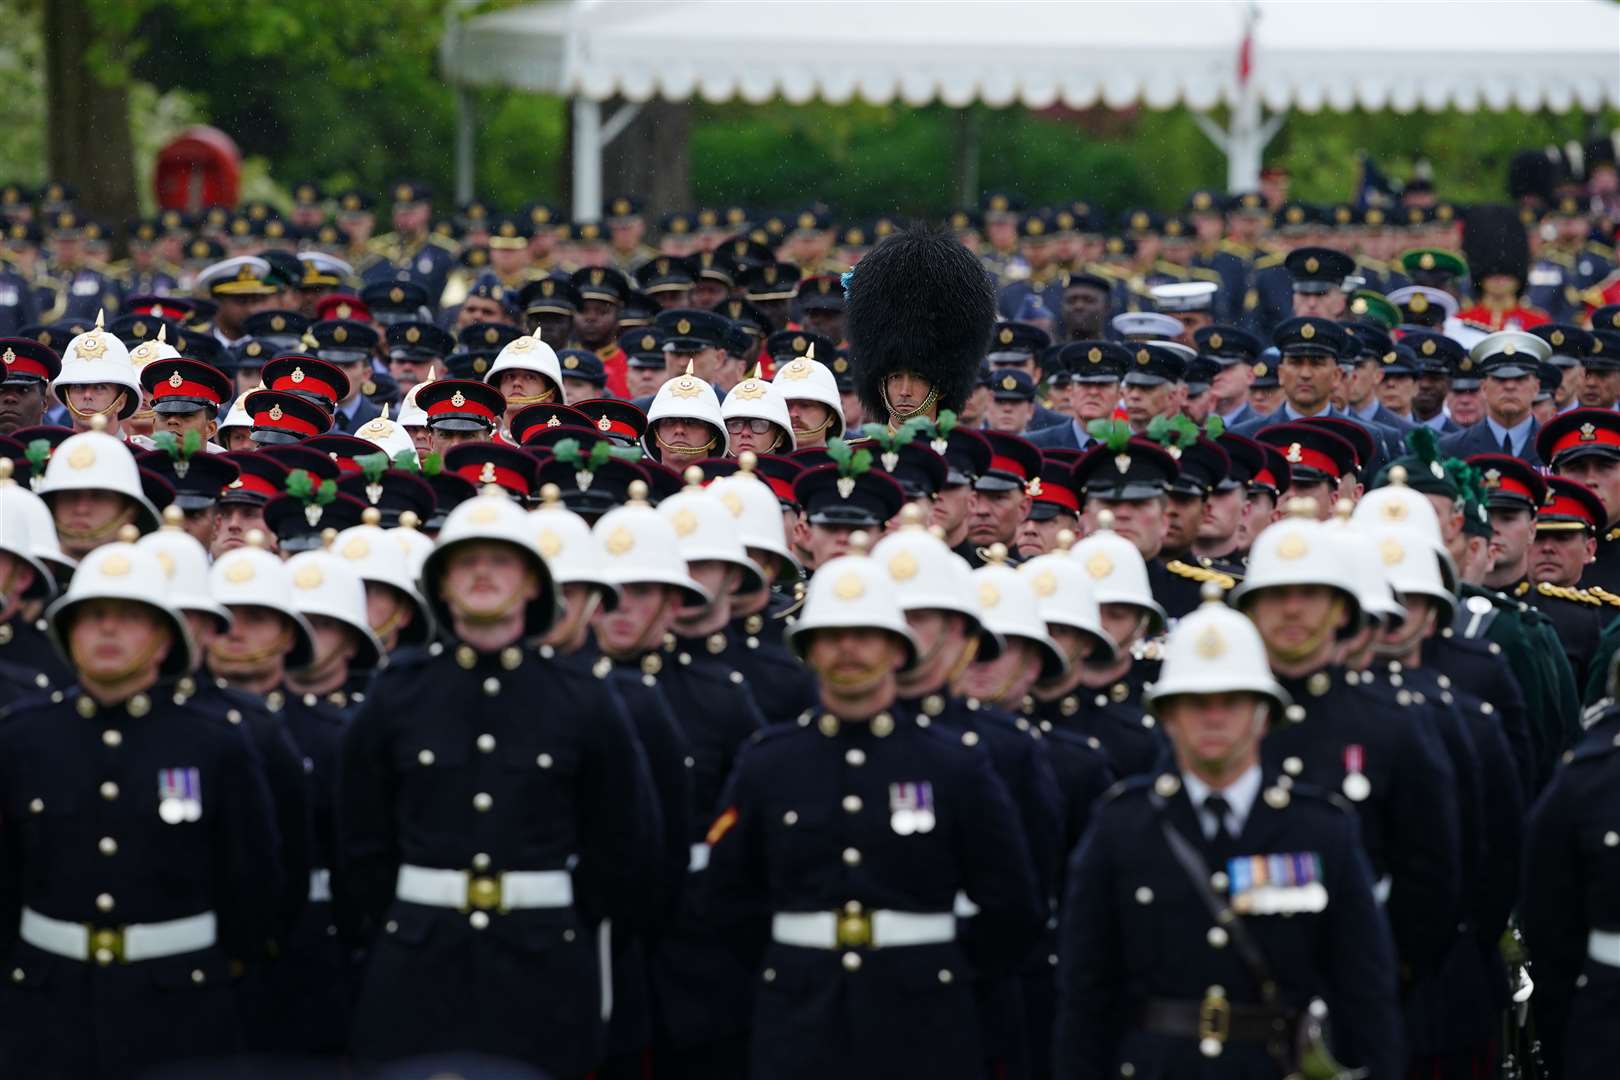 Members of the military prepare to give the royal salute to the King and Queen in the gardens of Buckingham Palace (Peter Byrne/PA)